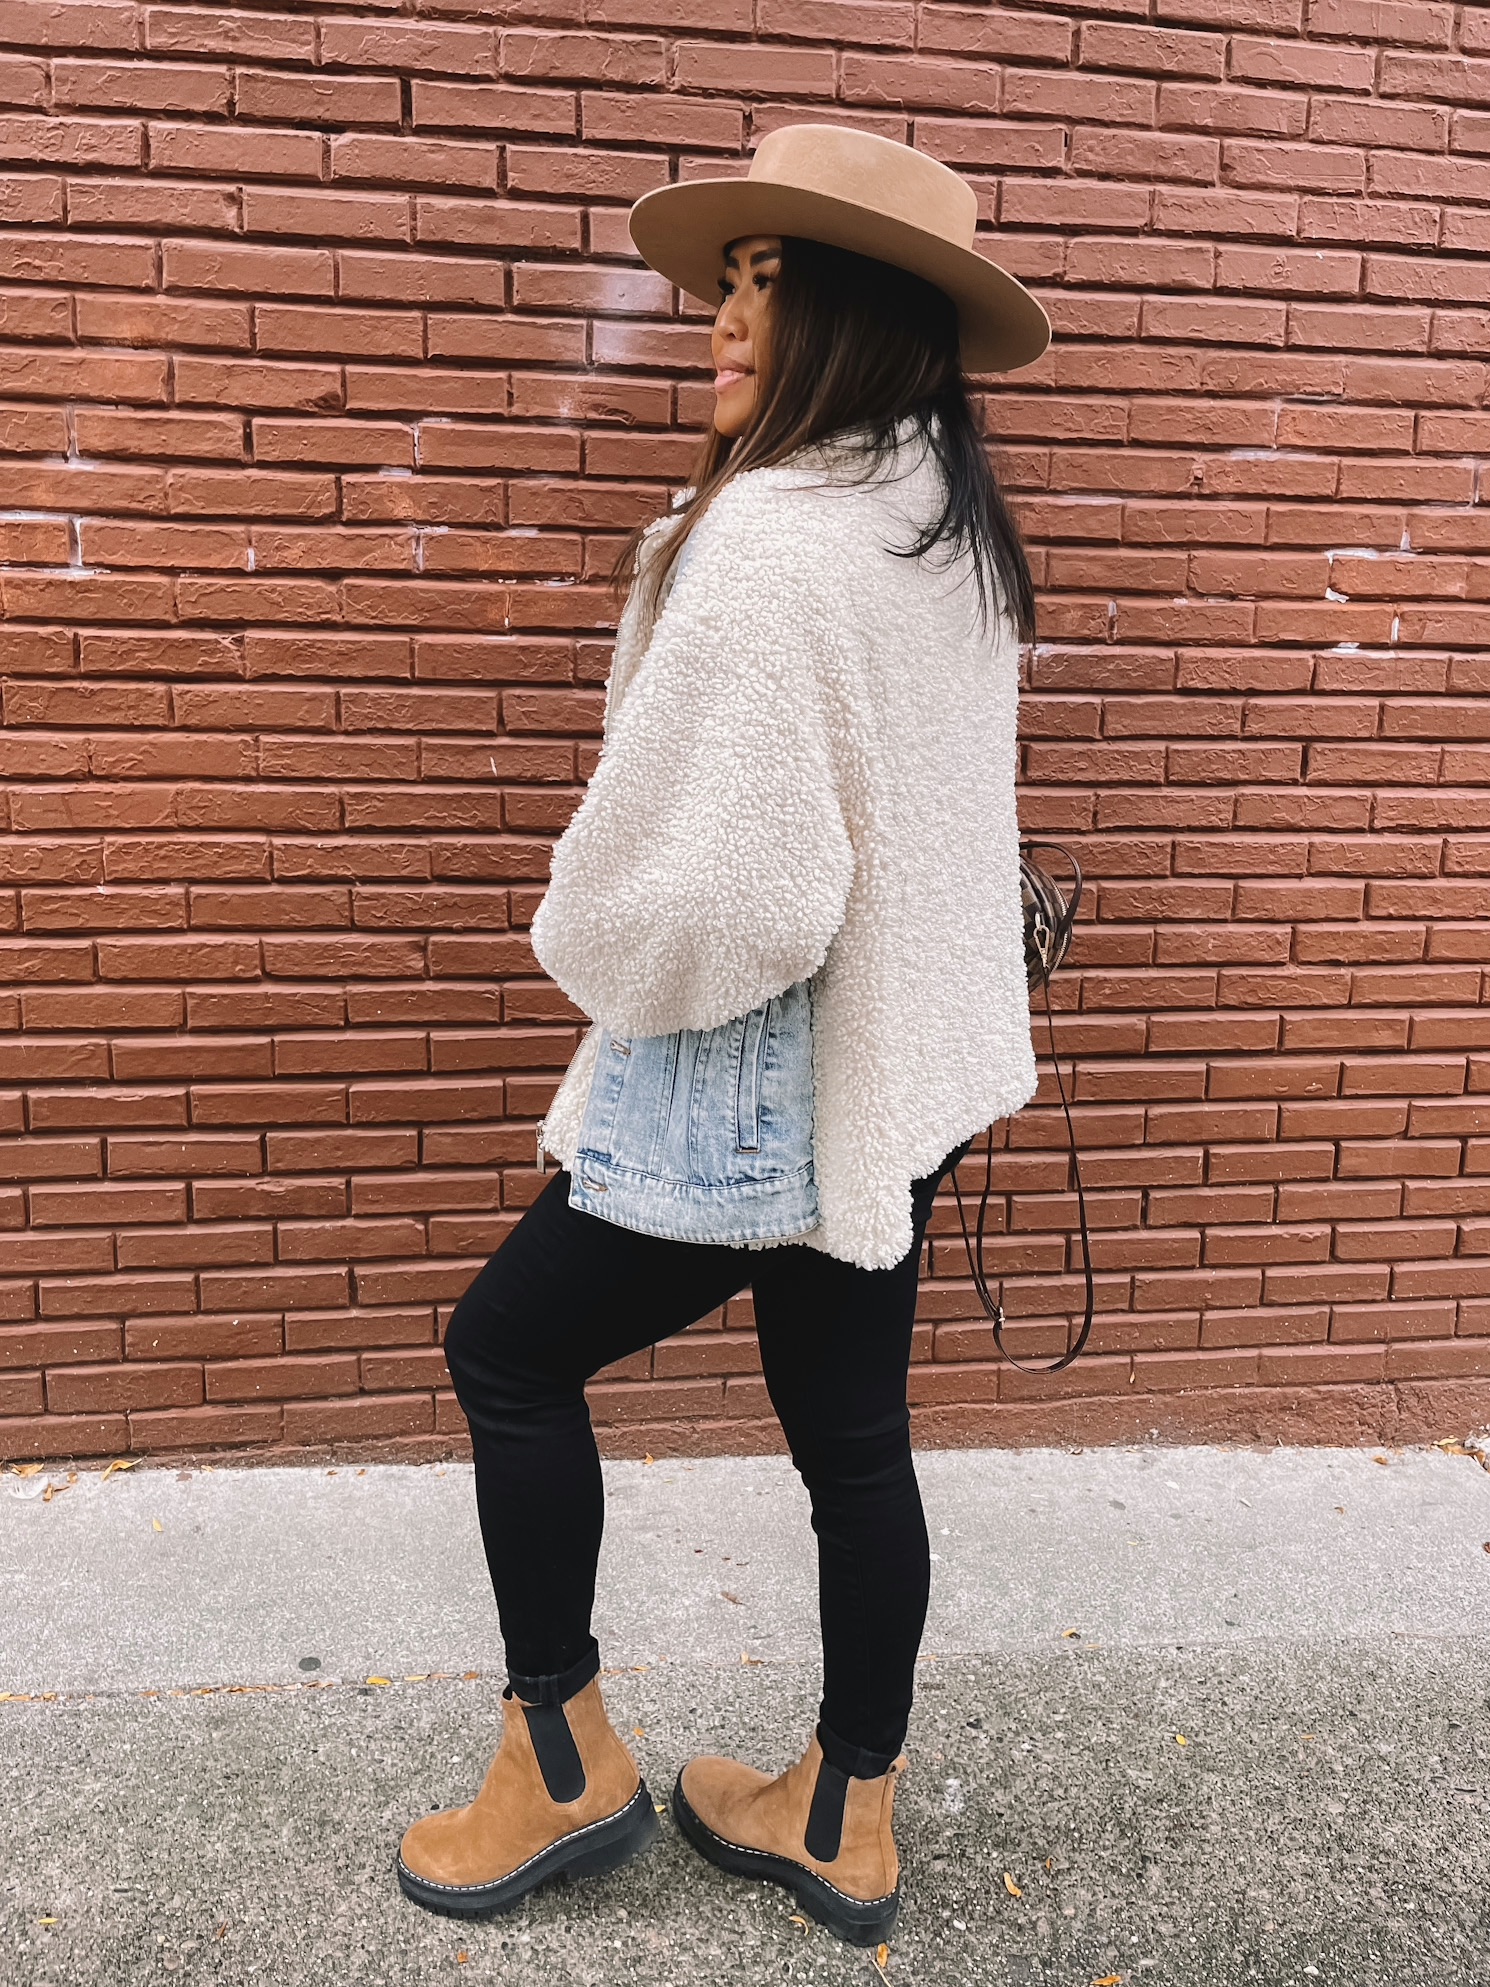 fall shearling jacket - outfit idea x Nordstrom